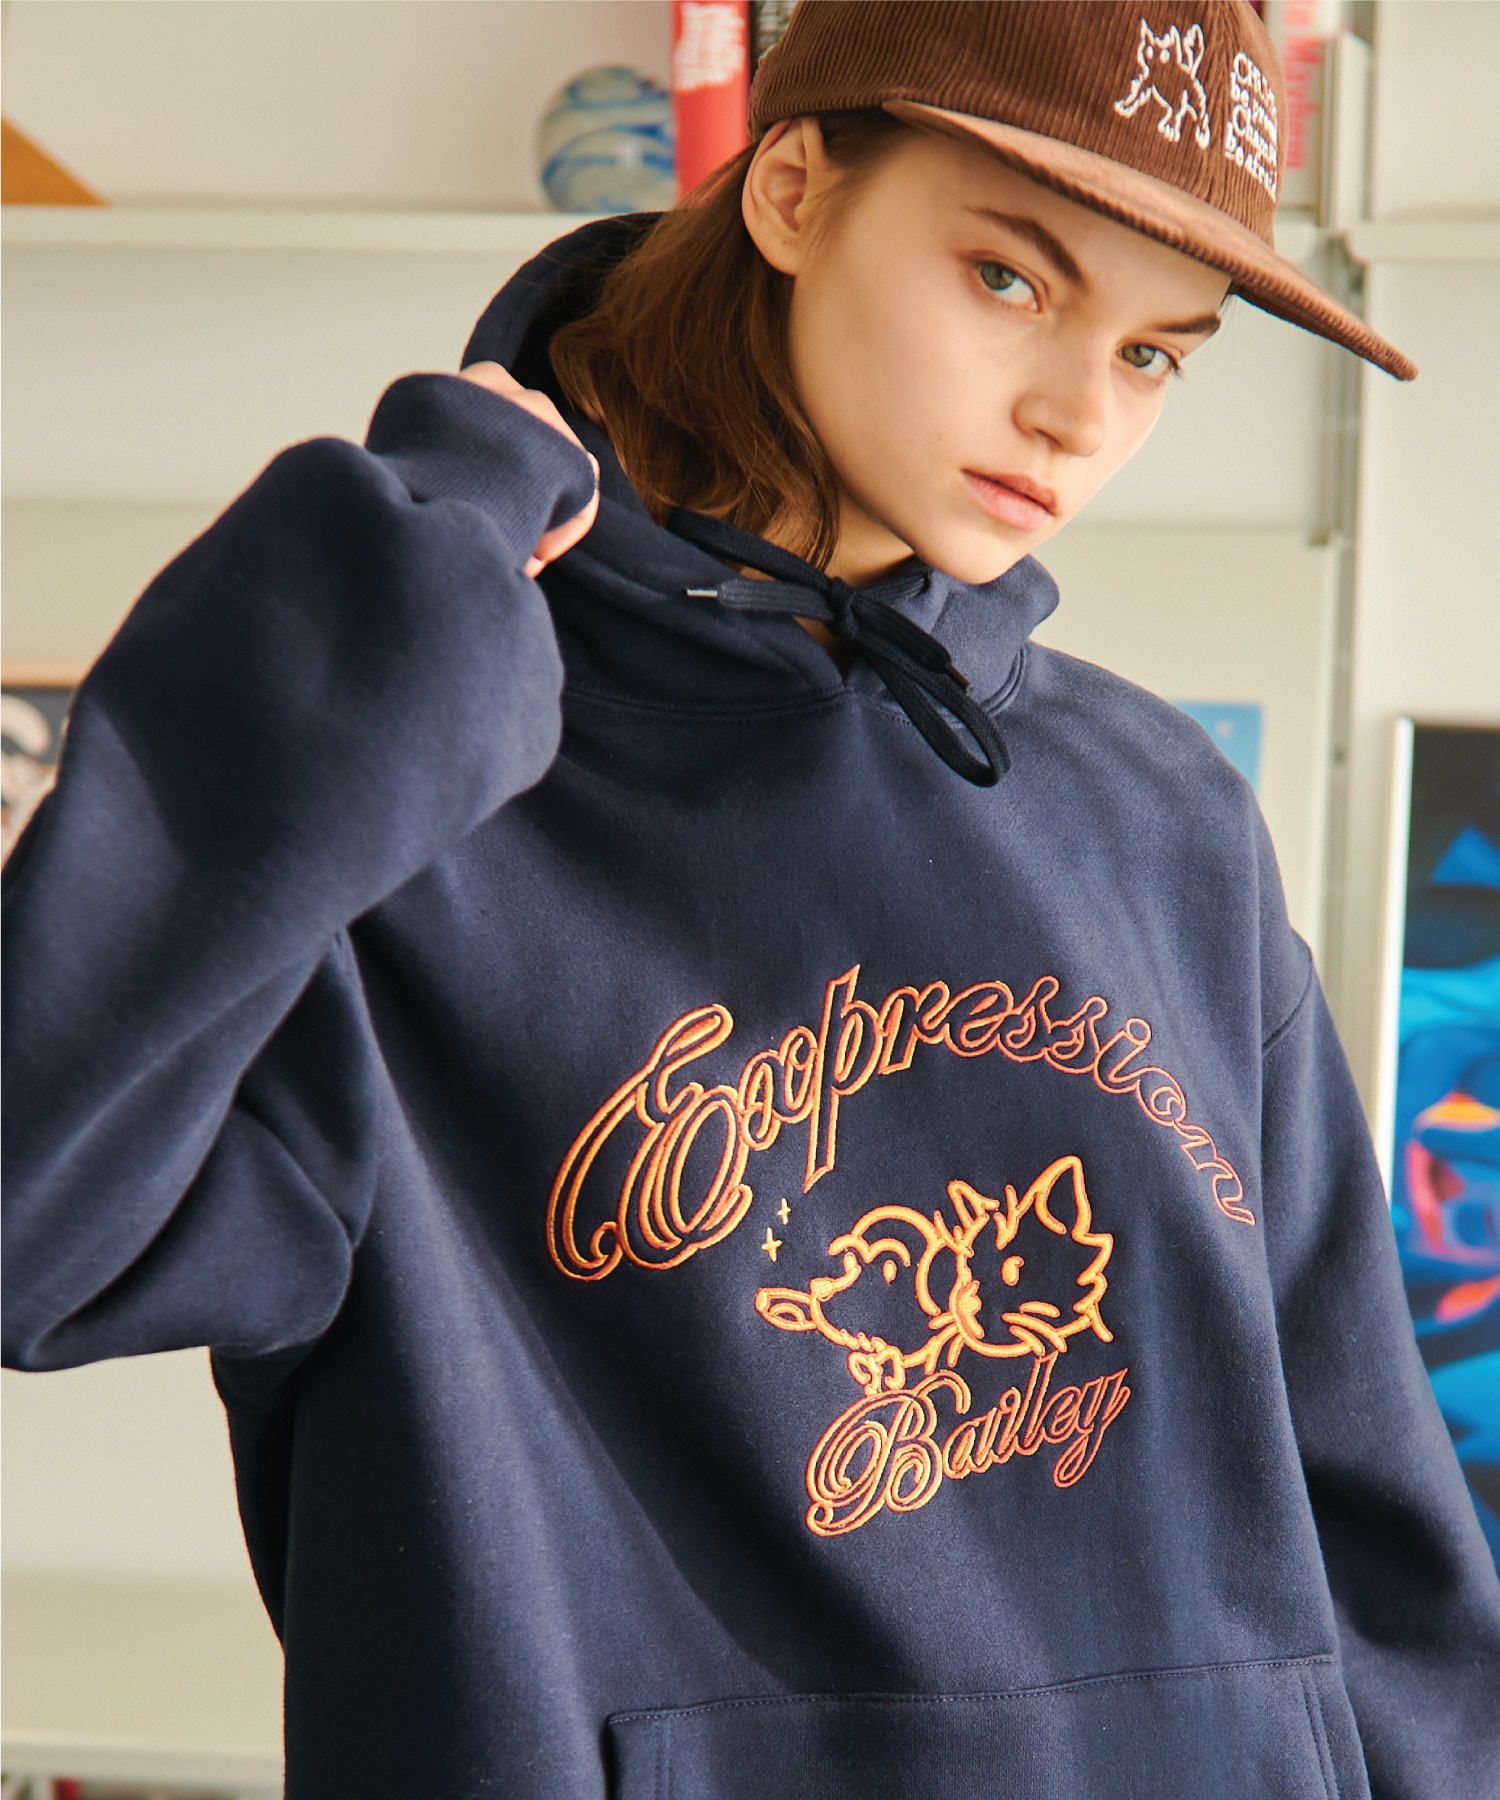 SS 22 Bailey s embroidered hoodie is navy